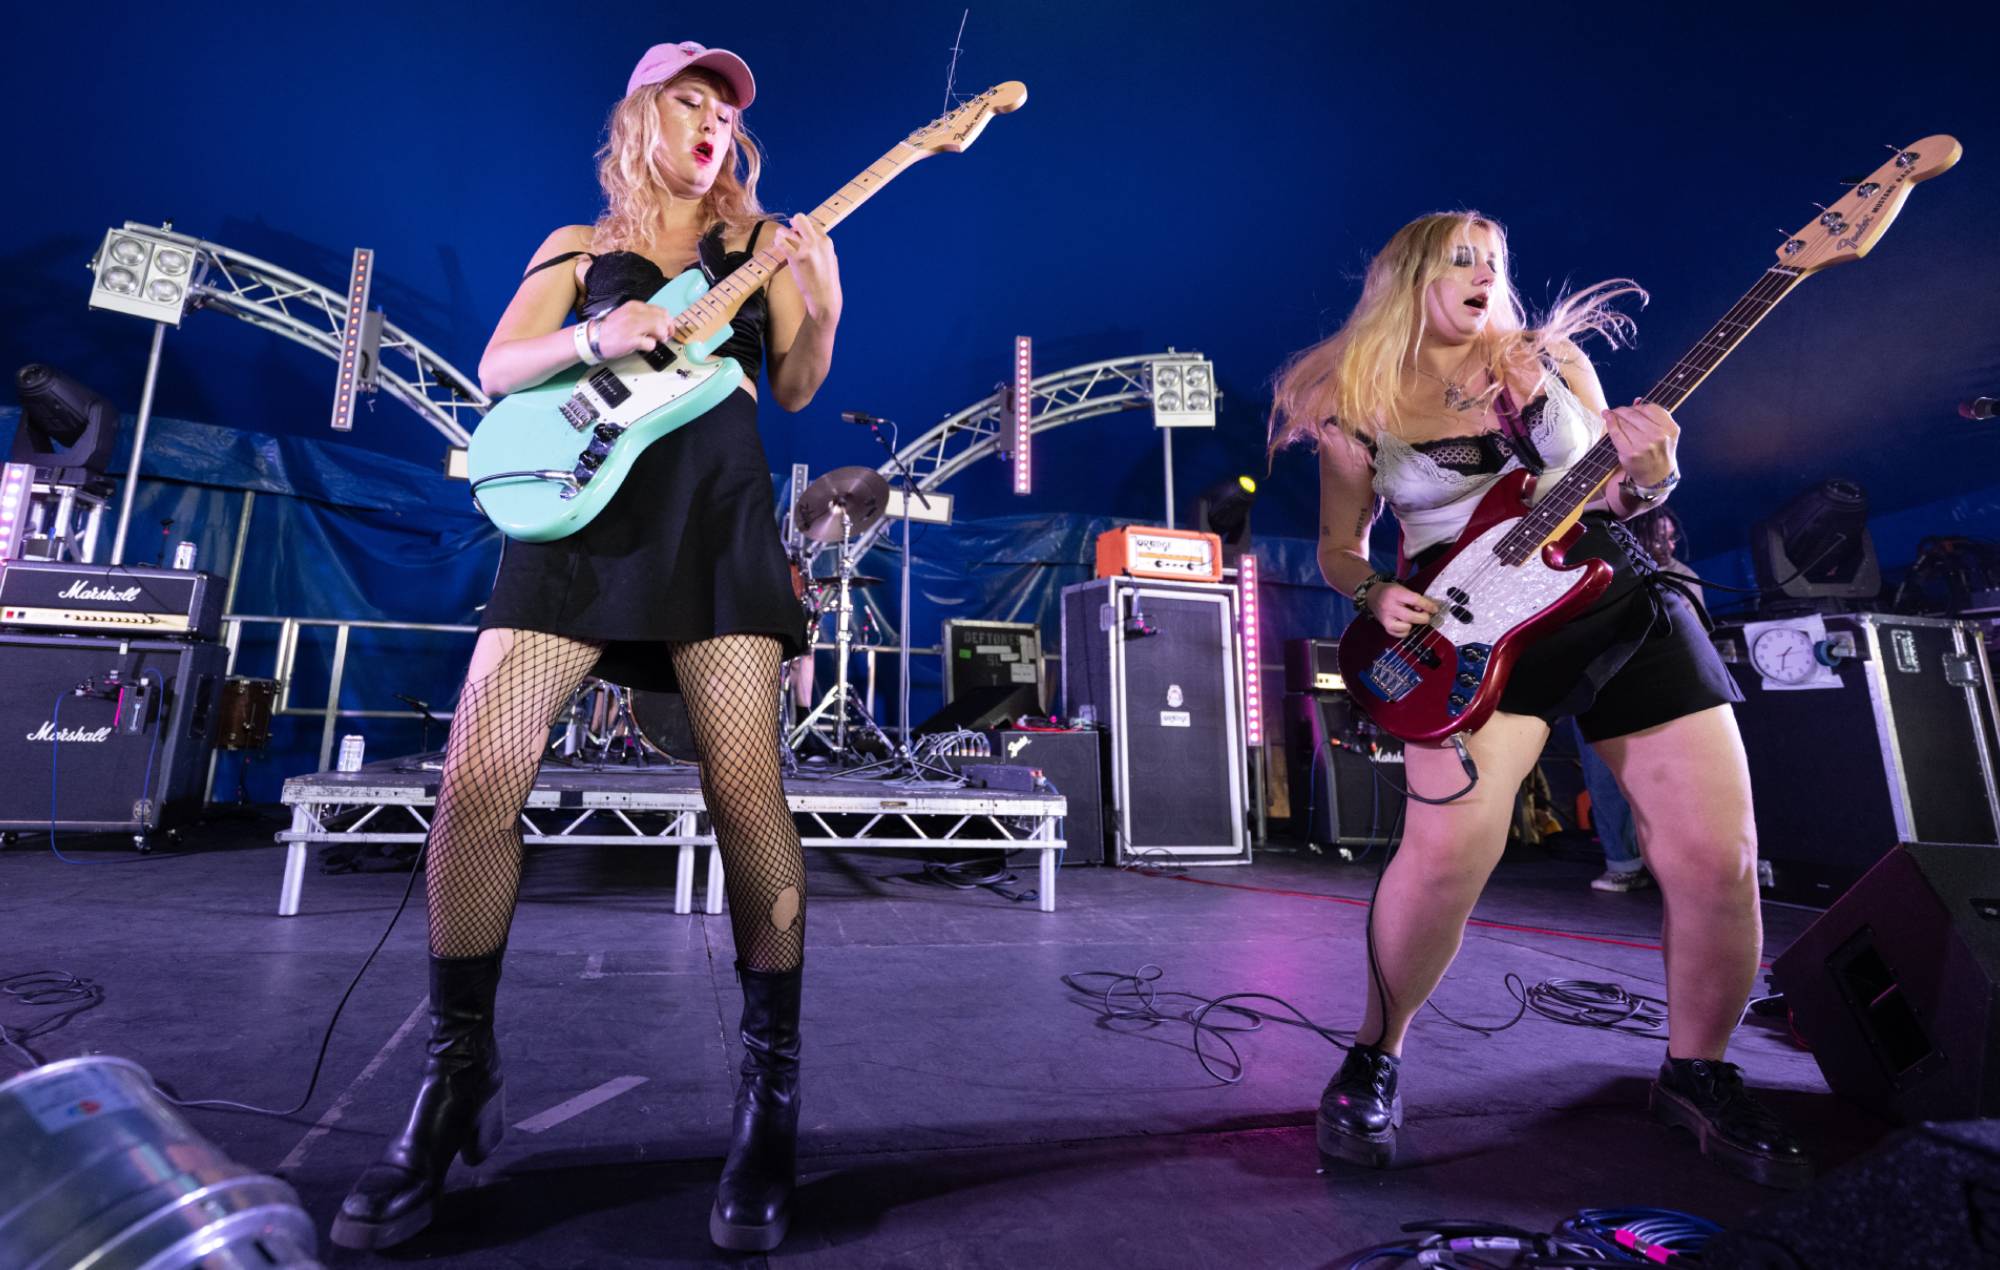 Phoebe Lunny and Lilly Macieira-Boşgelmez of Lambrini Girls perform at 2000 Trees Festival at Upcote Farm on July 6, 2023 in Cheltenham, England. Credit: Katja Ogrin via Getty